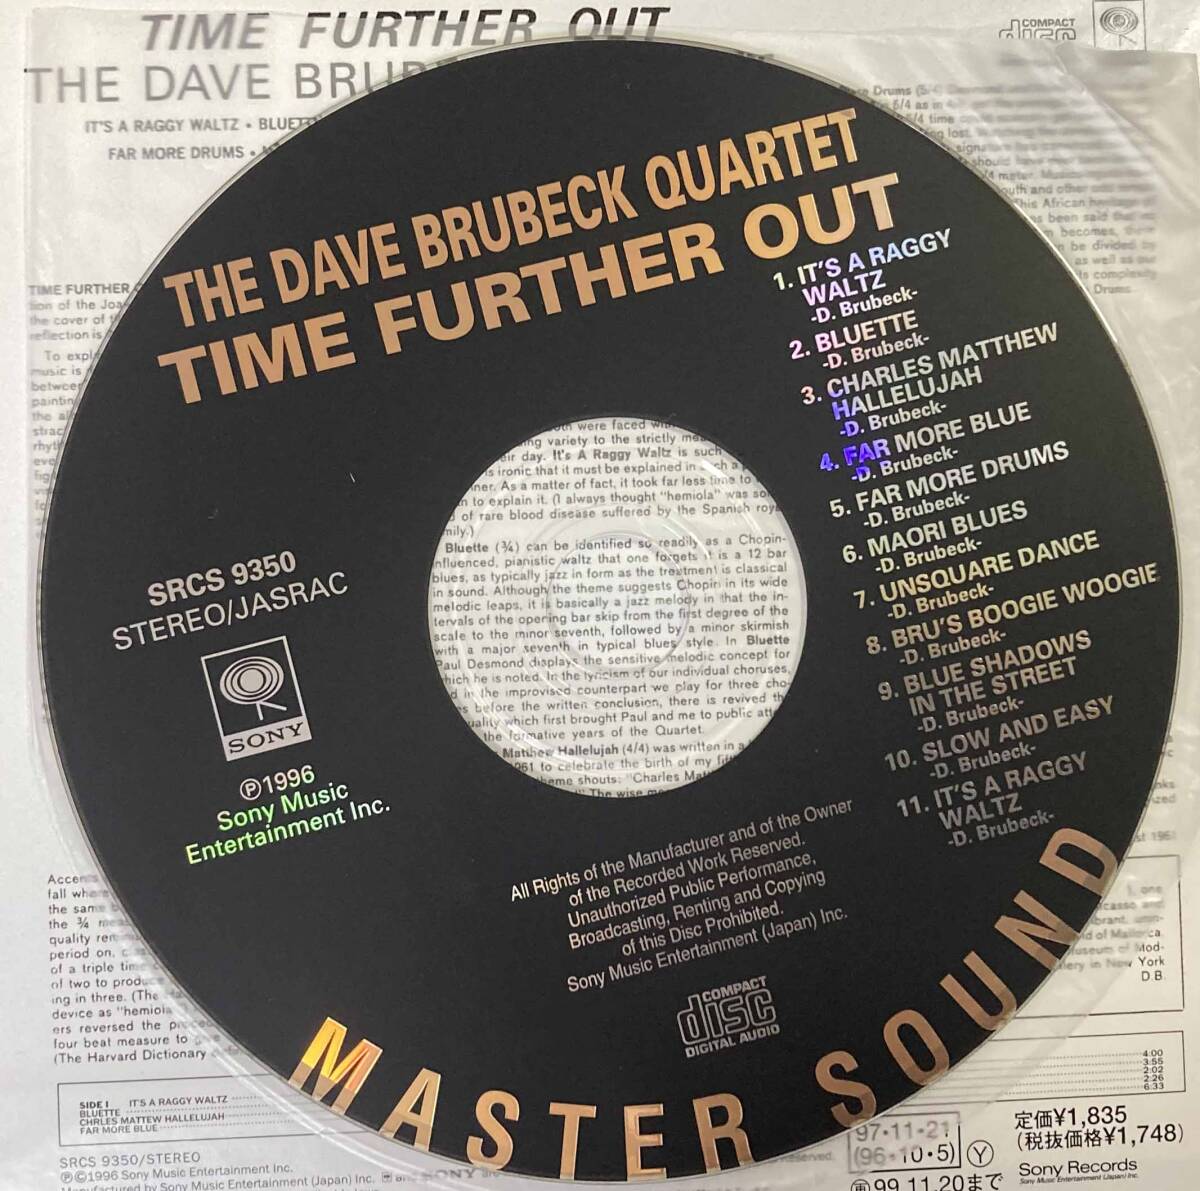 Dave Brubeck Quartet / Time Further Out 中古CD 国内盤 帯付き 紙ジャケ リマスタリング 初回限定盤 日本初CD化の画像3